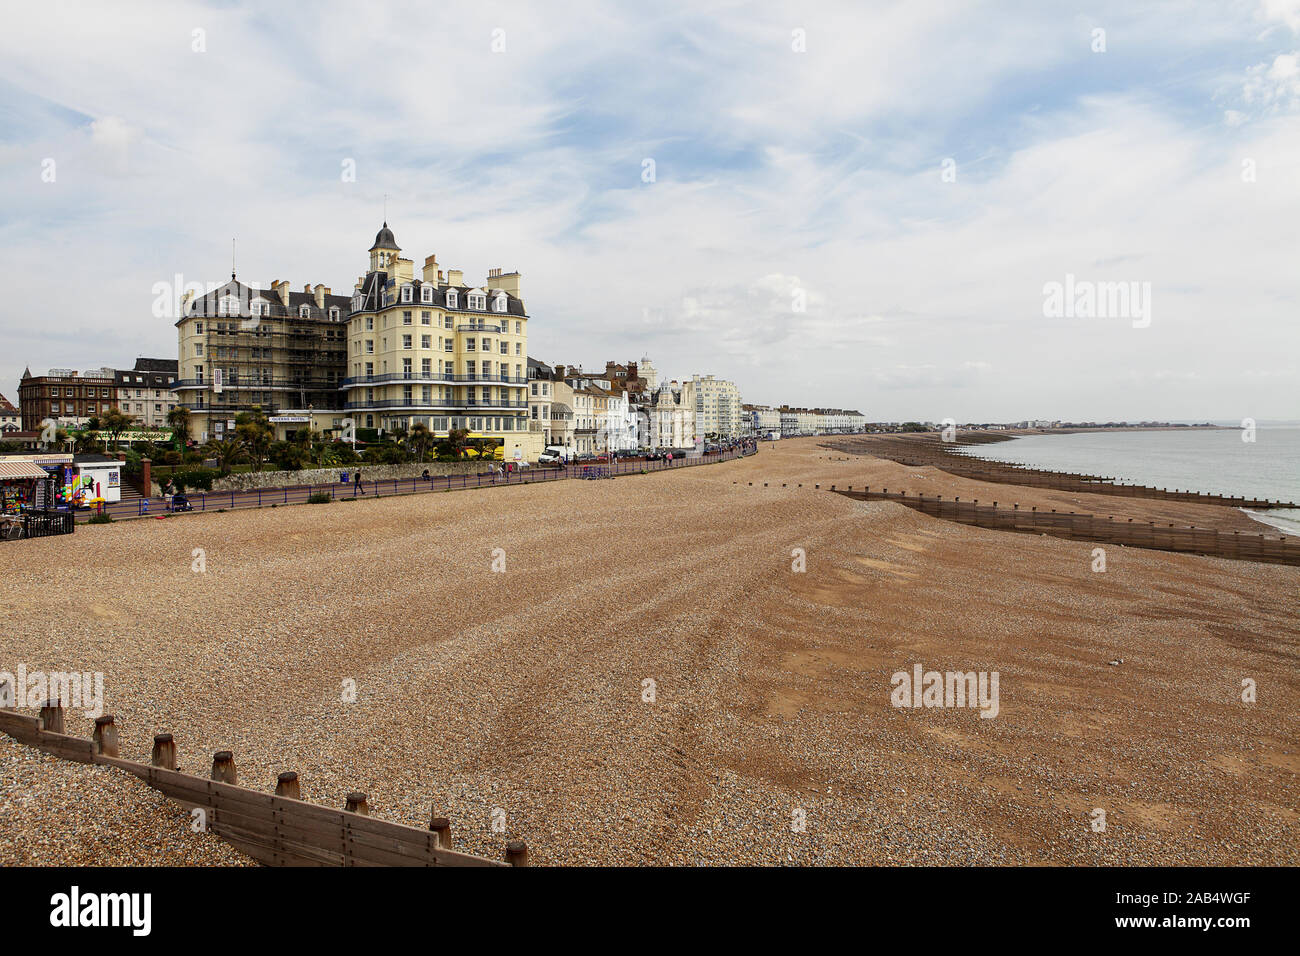 Seafront hotels and multiple groynes on Eastbourne beach, viewed here on an overcast day in May 2019. Stock Photo